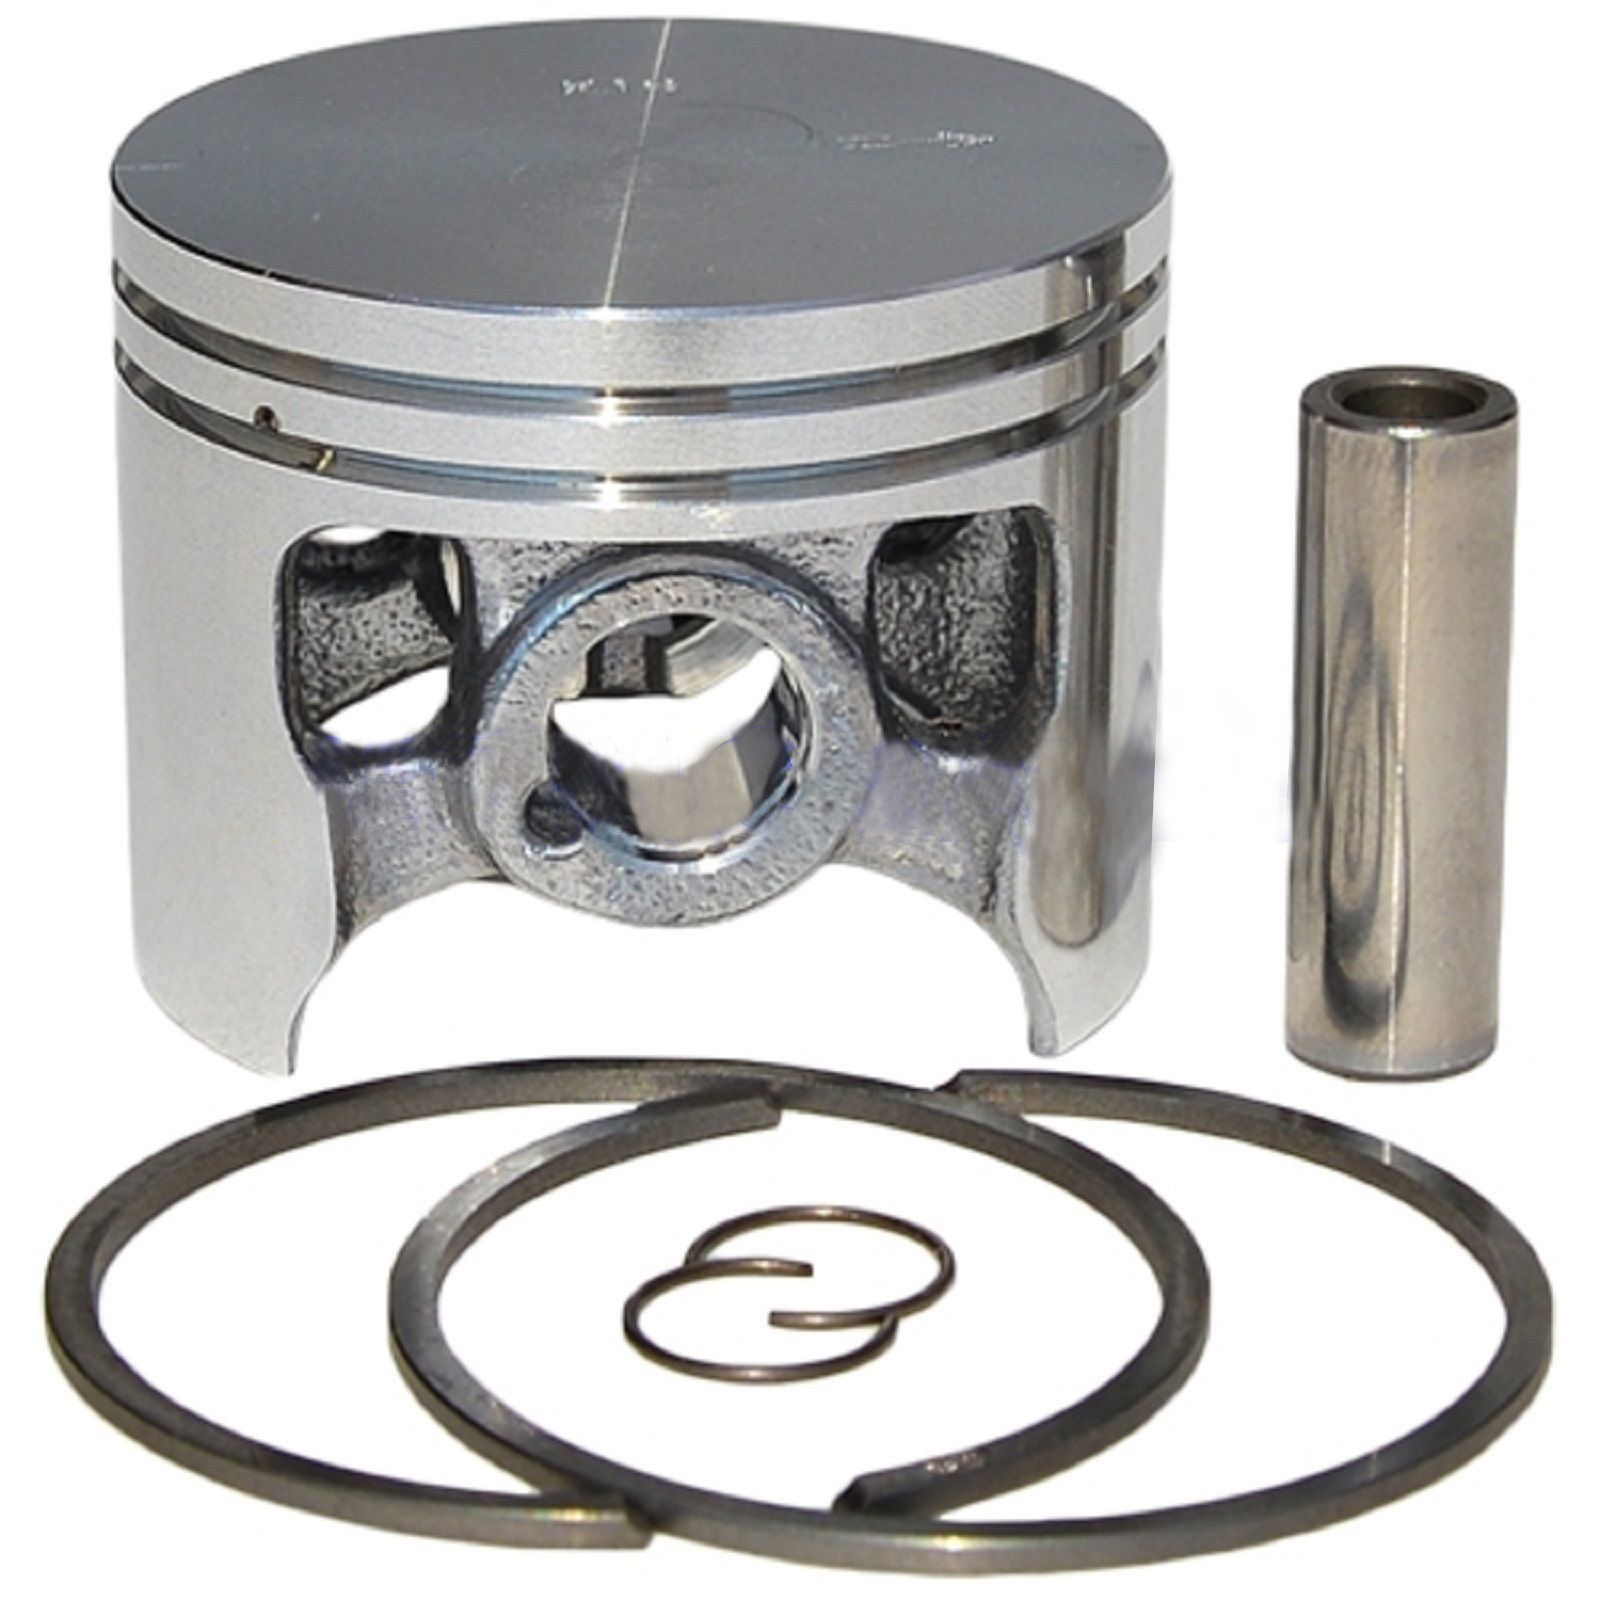 52MM PISTON AND RING KIT W/ GASKETS For STIHL 046 MS460 CHAINSAW